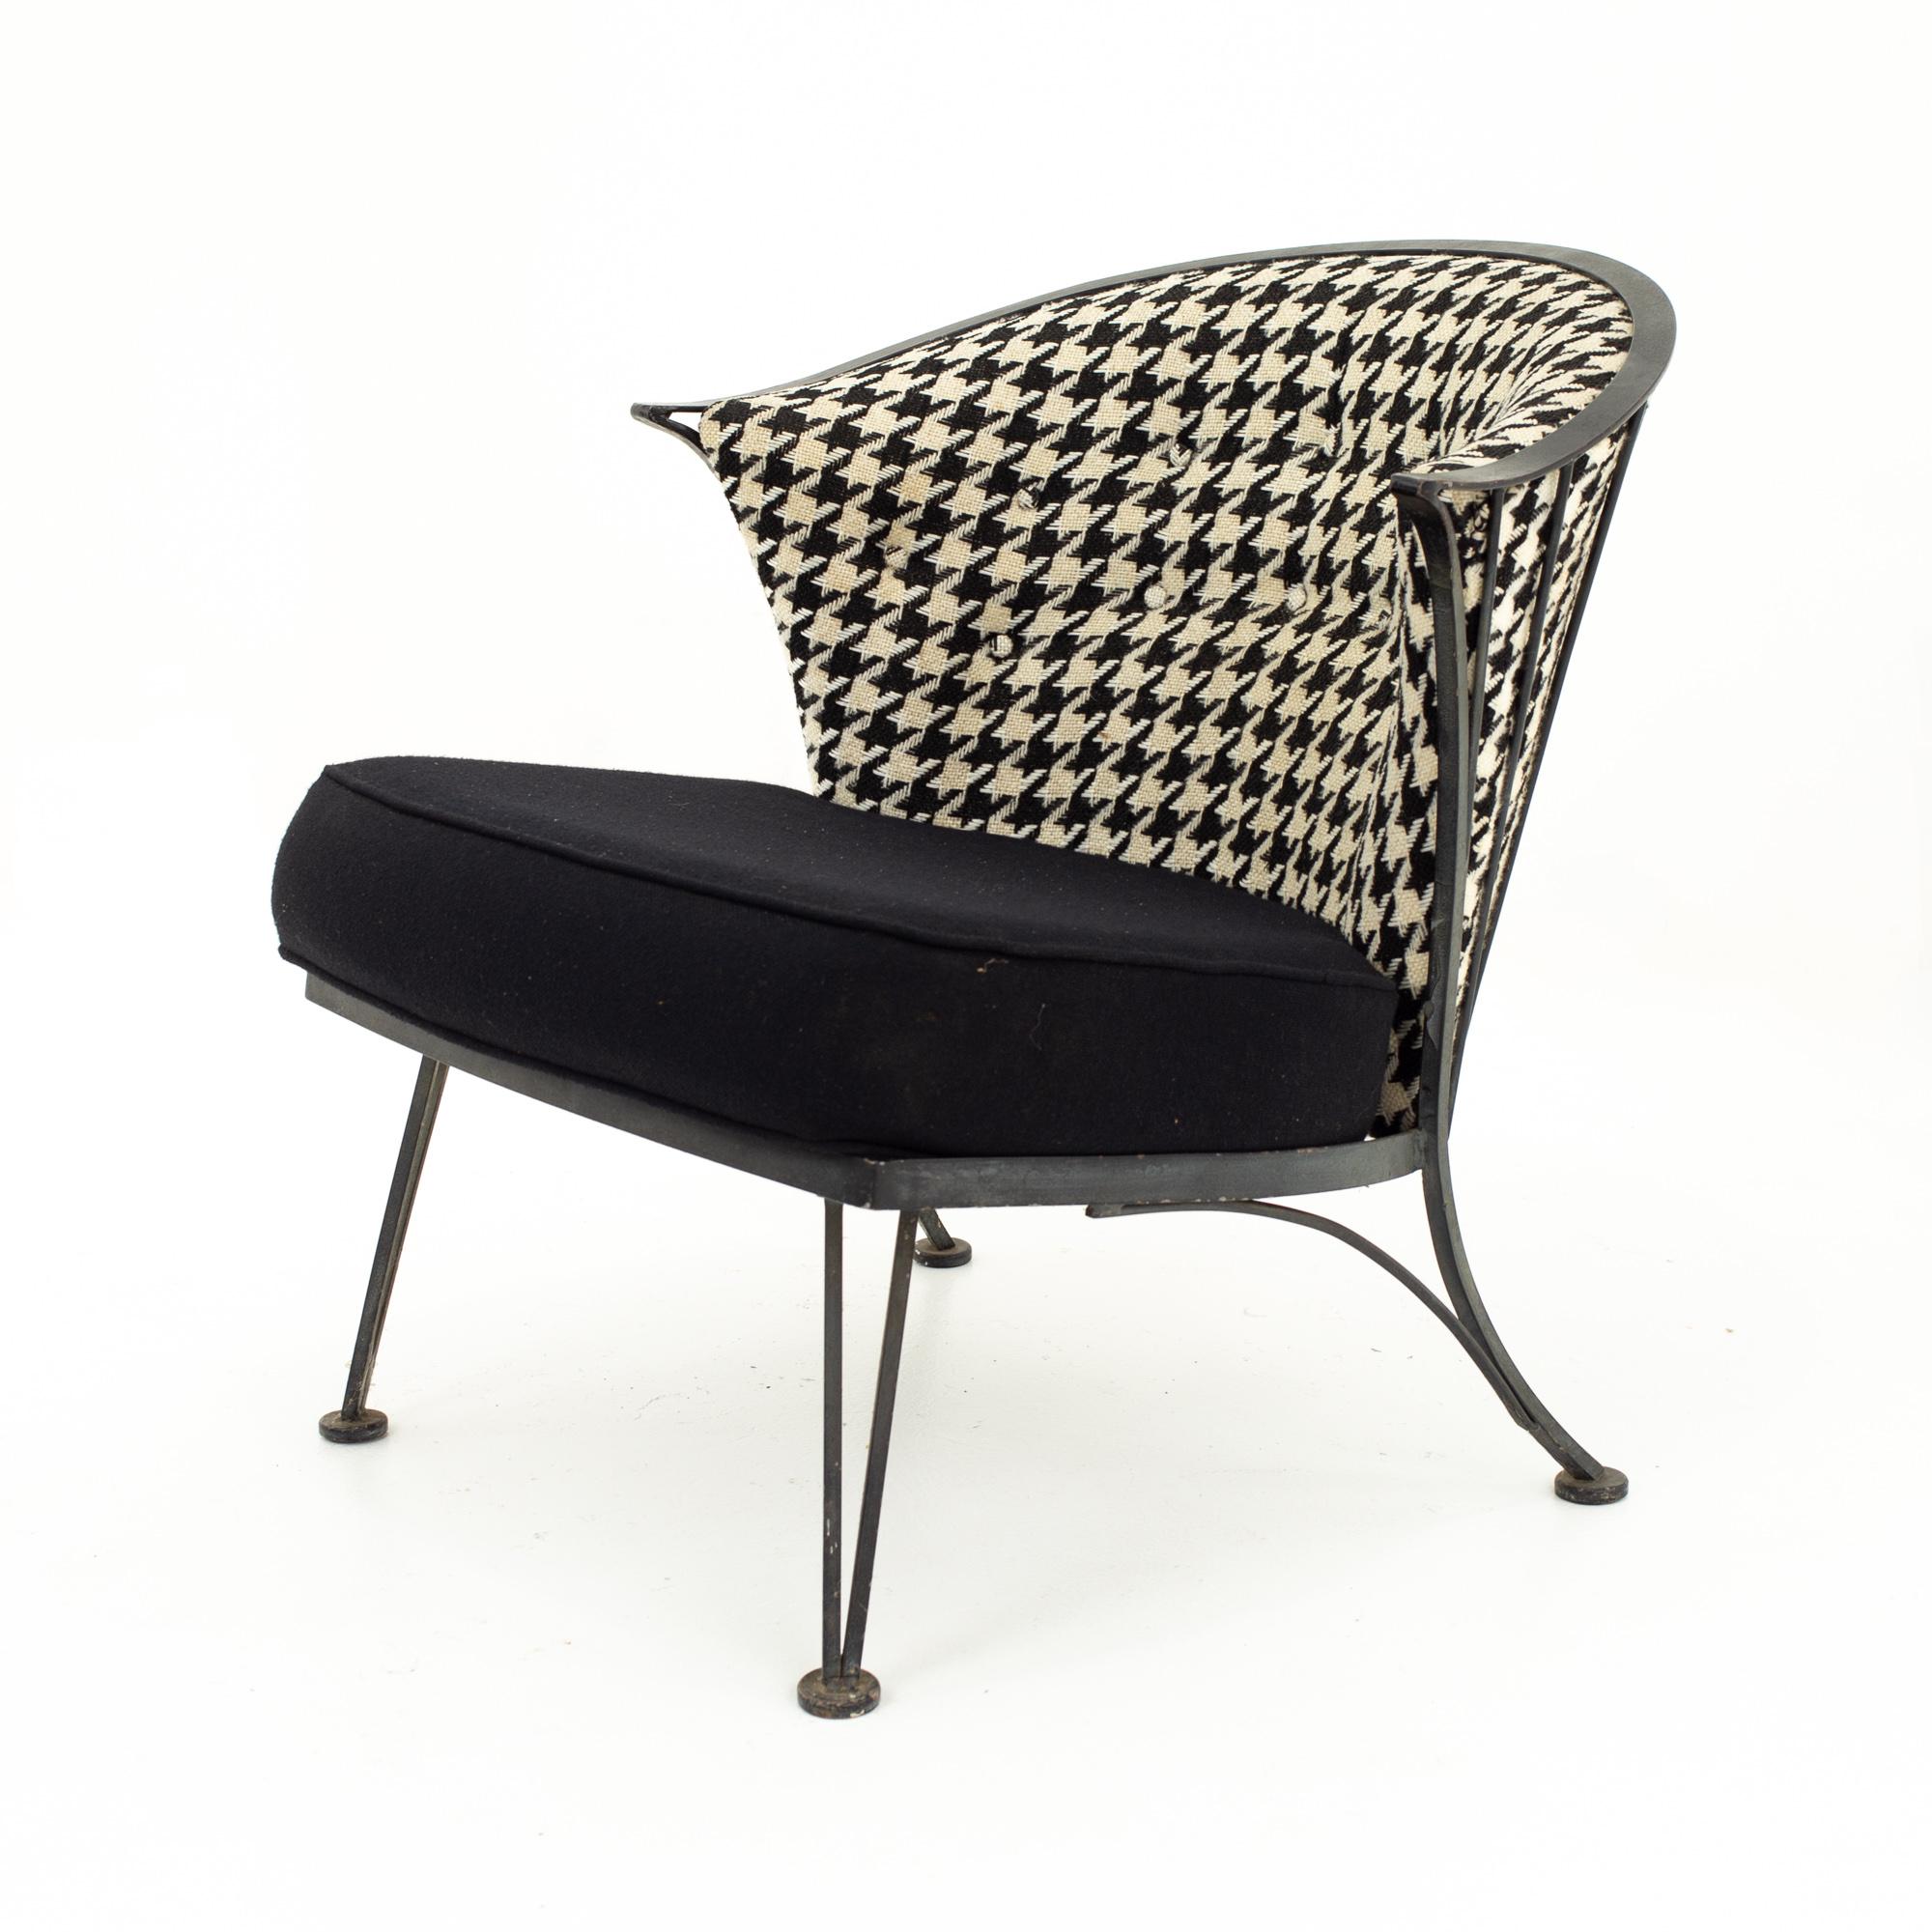 Mid-20th Century Salterini MCM Outdoor Wrought Iron and Black & White Houndstooth Patio Chairs, 3